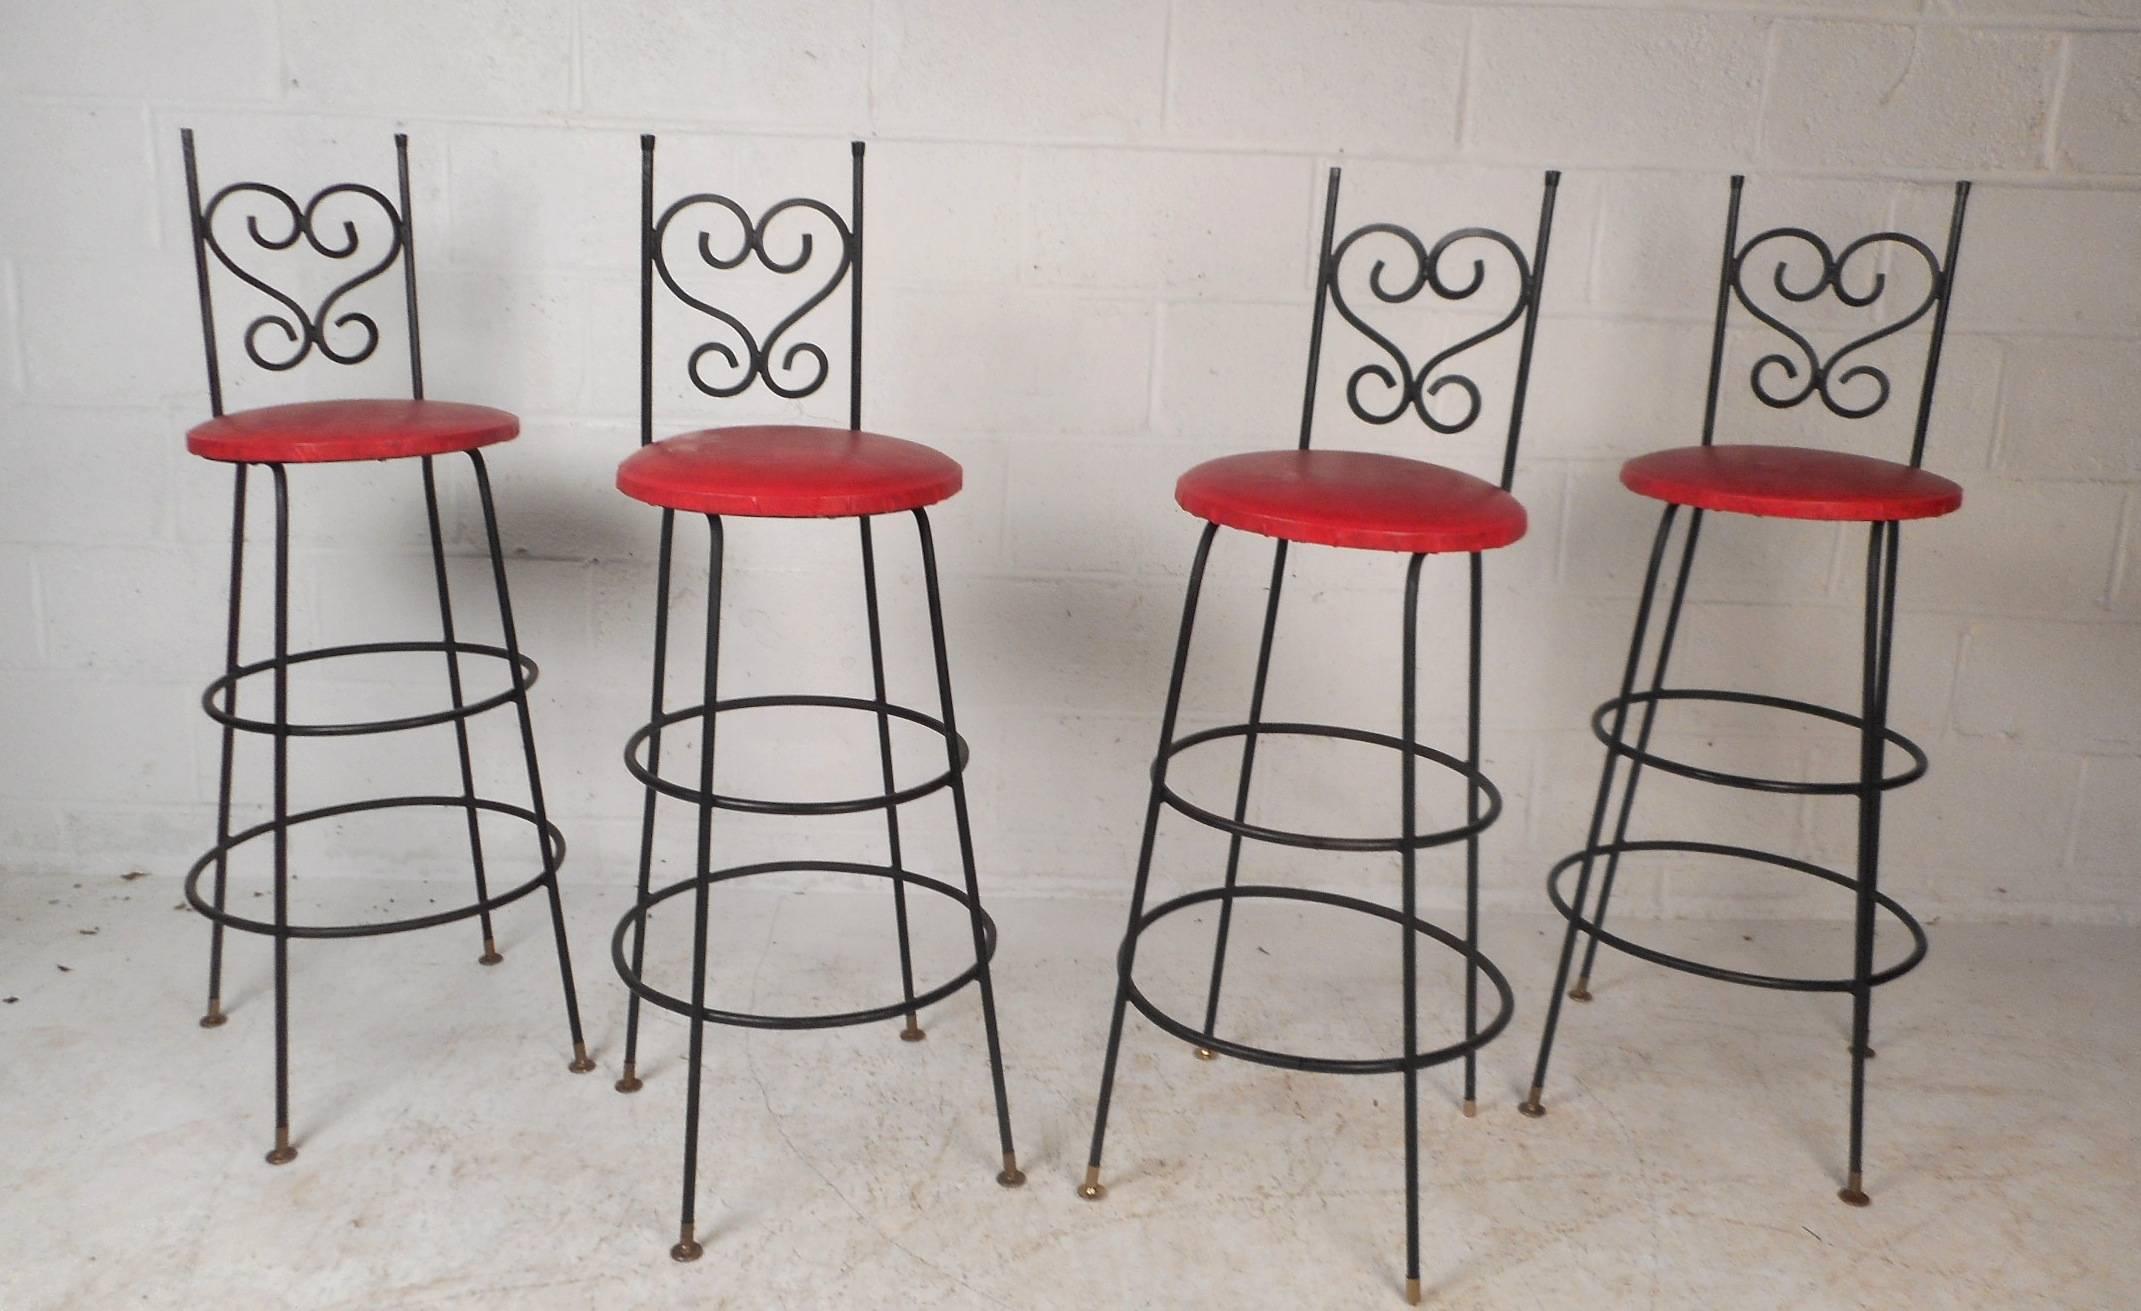 This beautiful set of four vintage bar stools feature bent wrought iron frames with vinyl covered seats. Stylish design with a thick padded seats covered in red vinyl. Unusual sculpted backrest with scroll detail and a base with two circular feet